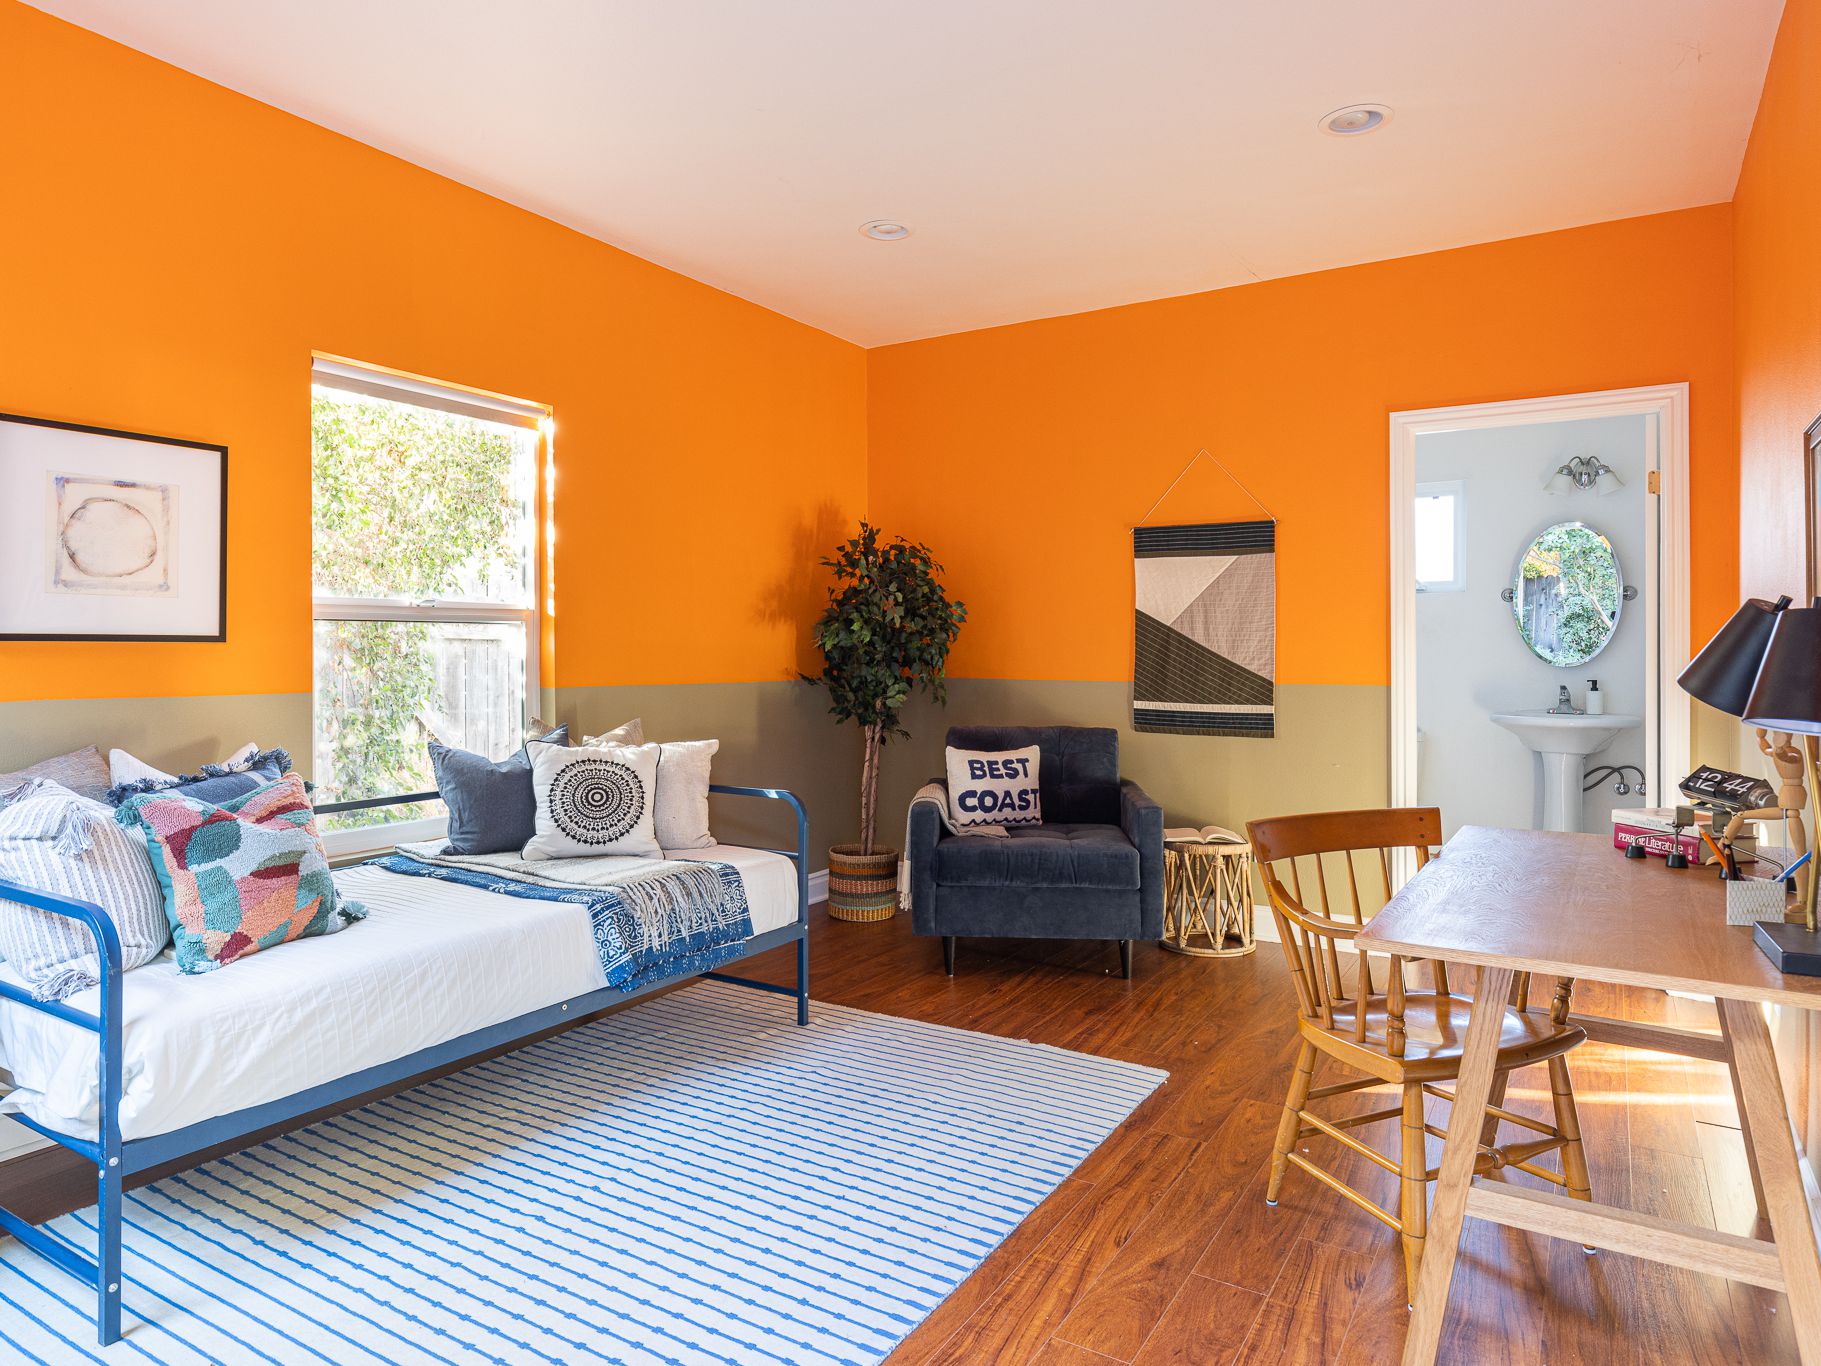 Bright Orange as two colour combination for bedroom walls